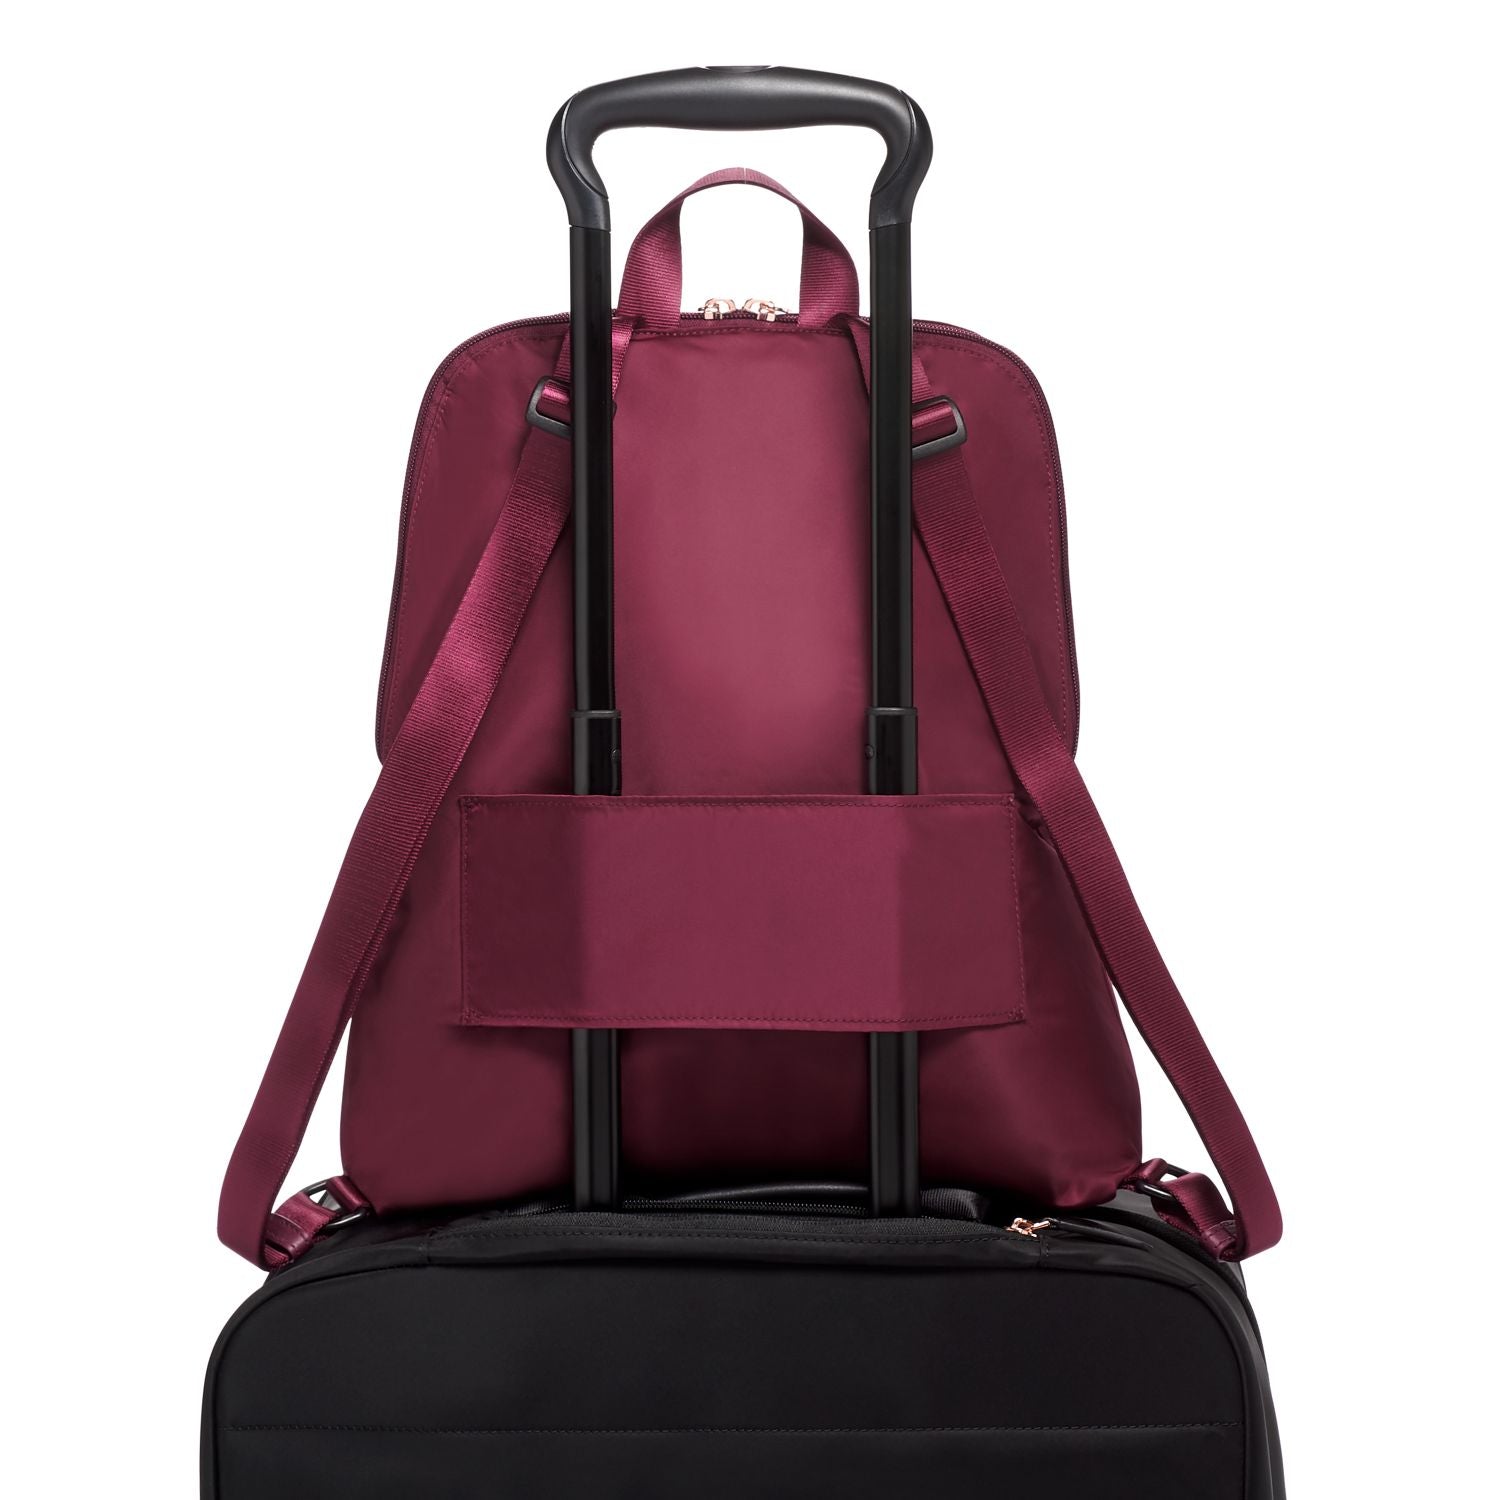 Just In Case Nylon Travel Backpack